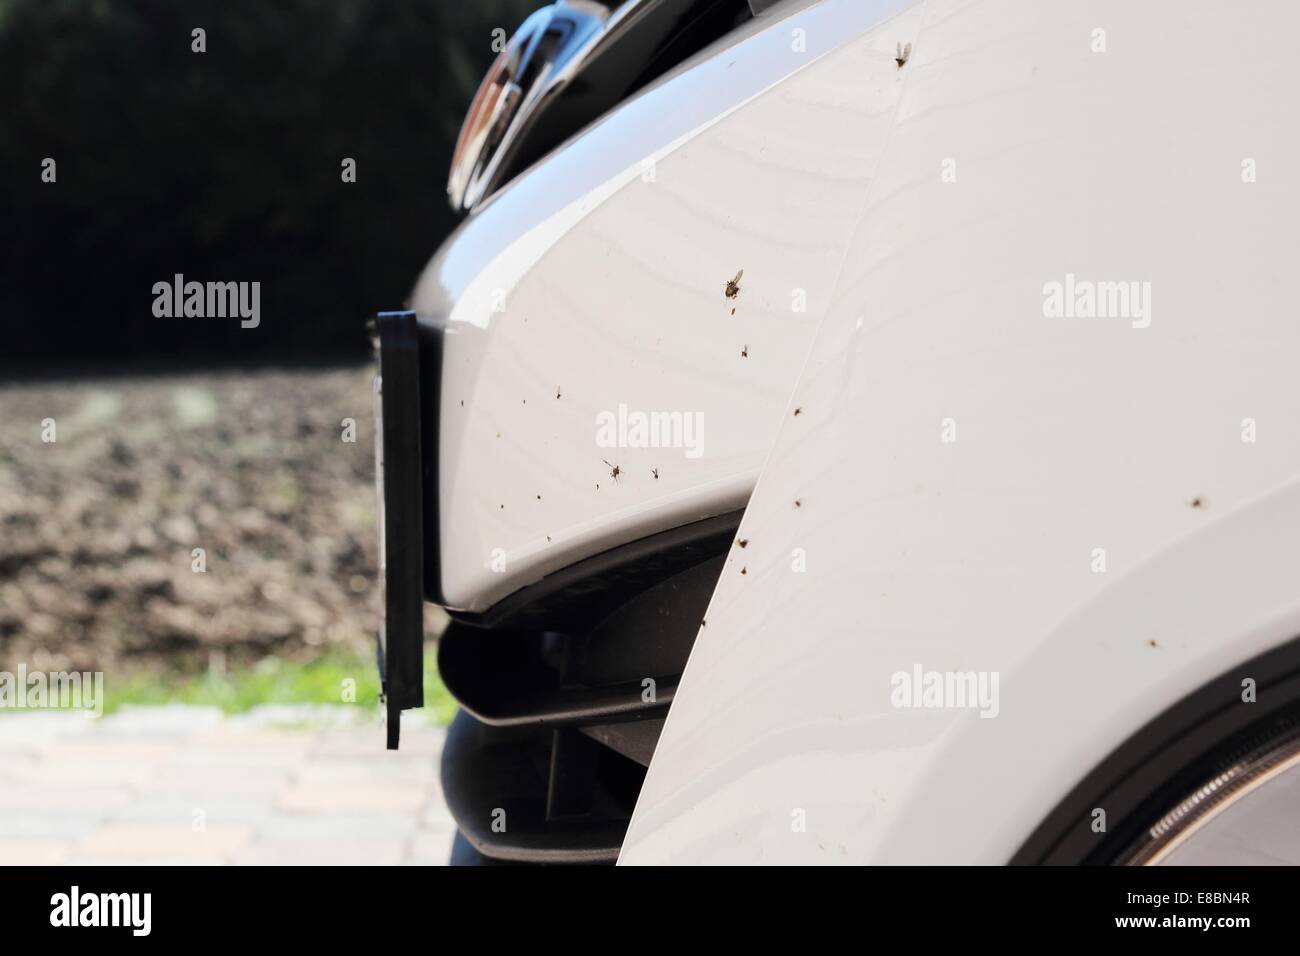 A Insects on a spoiler grille of a car Stock Photo